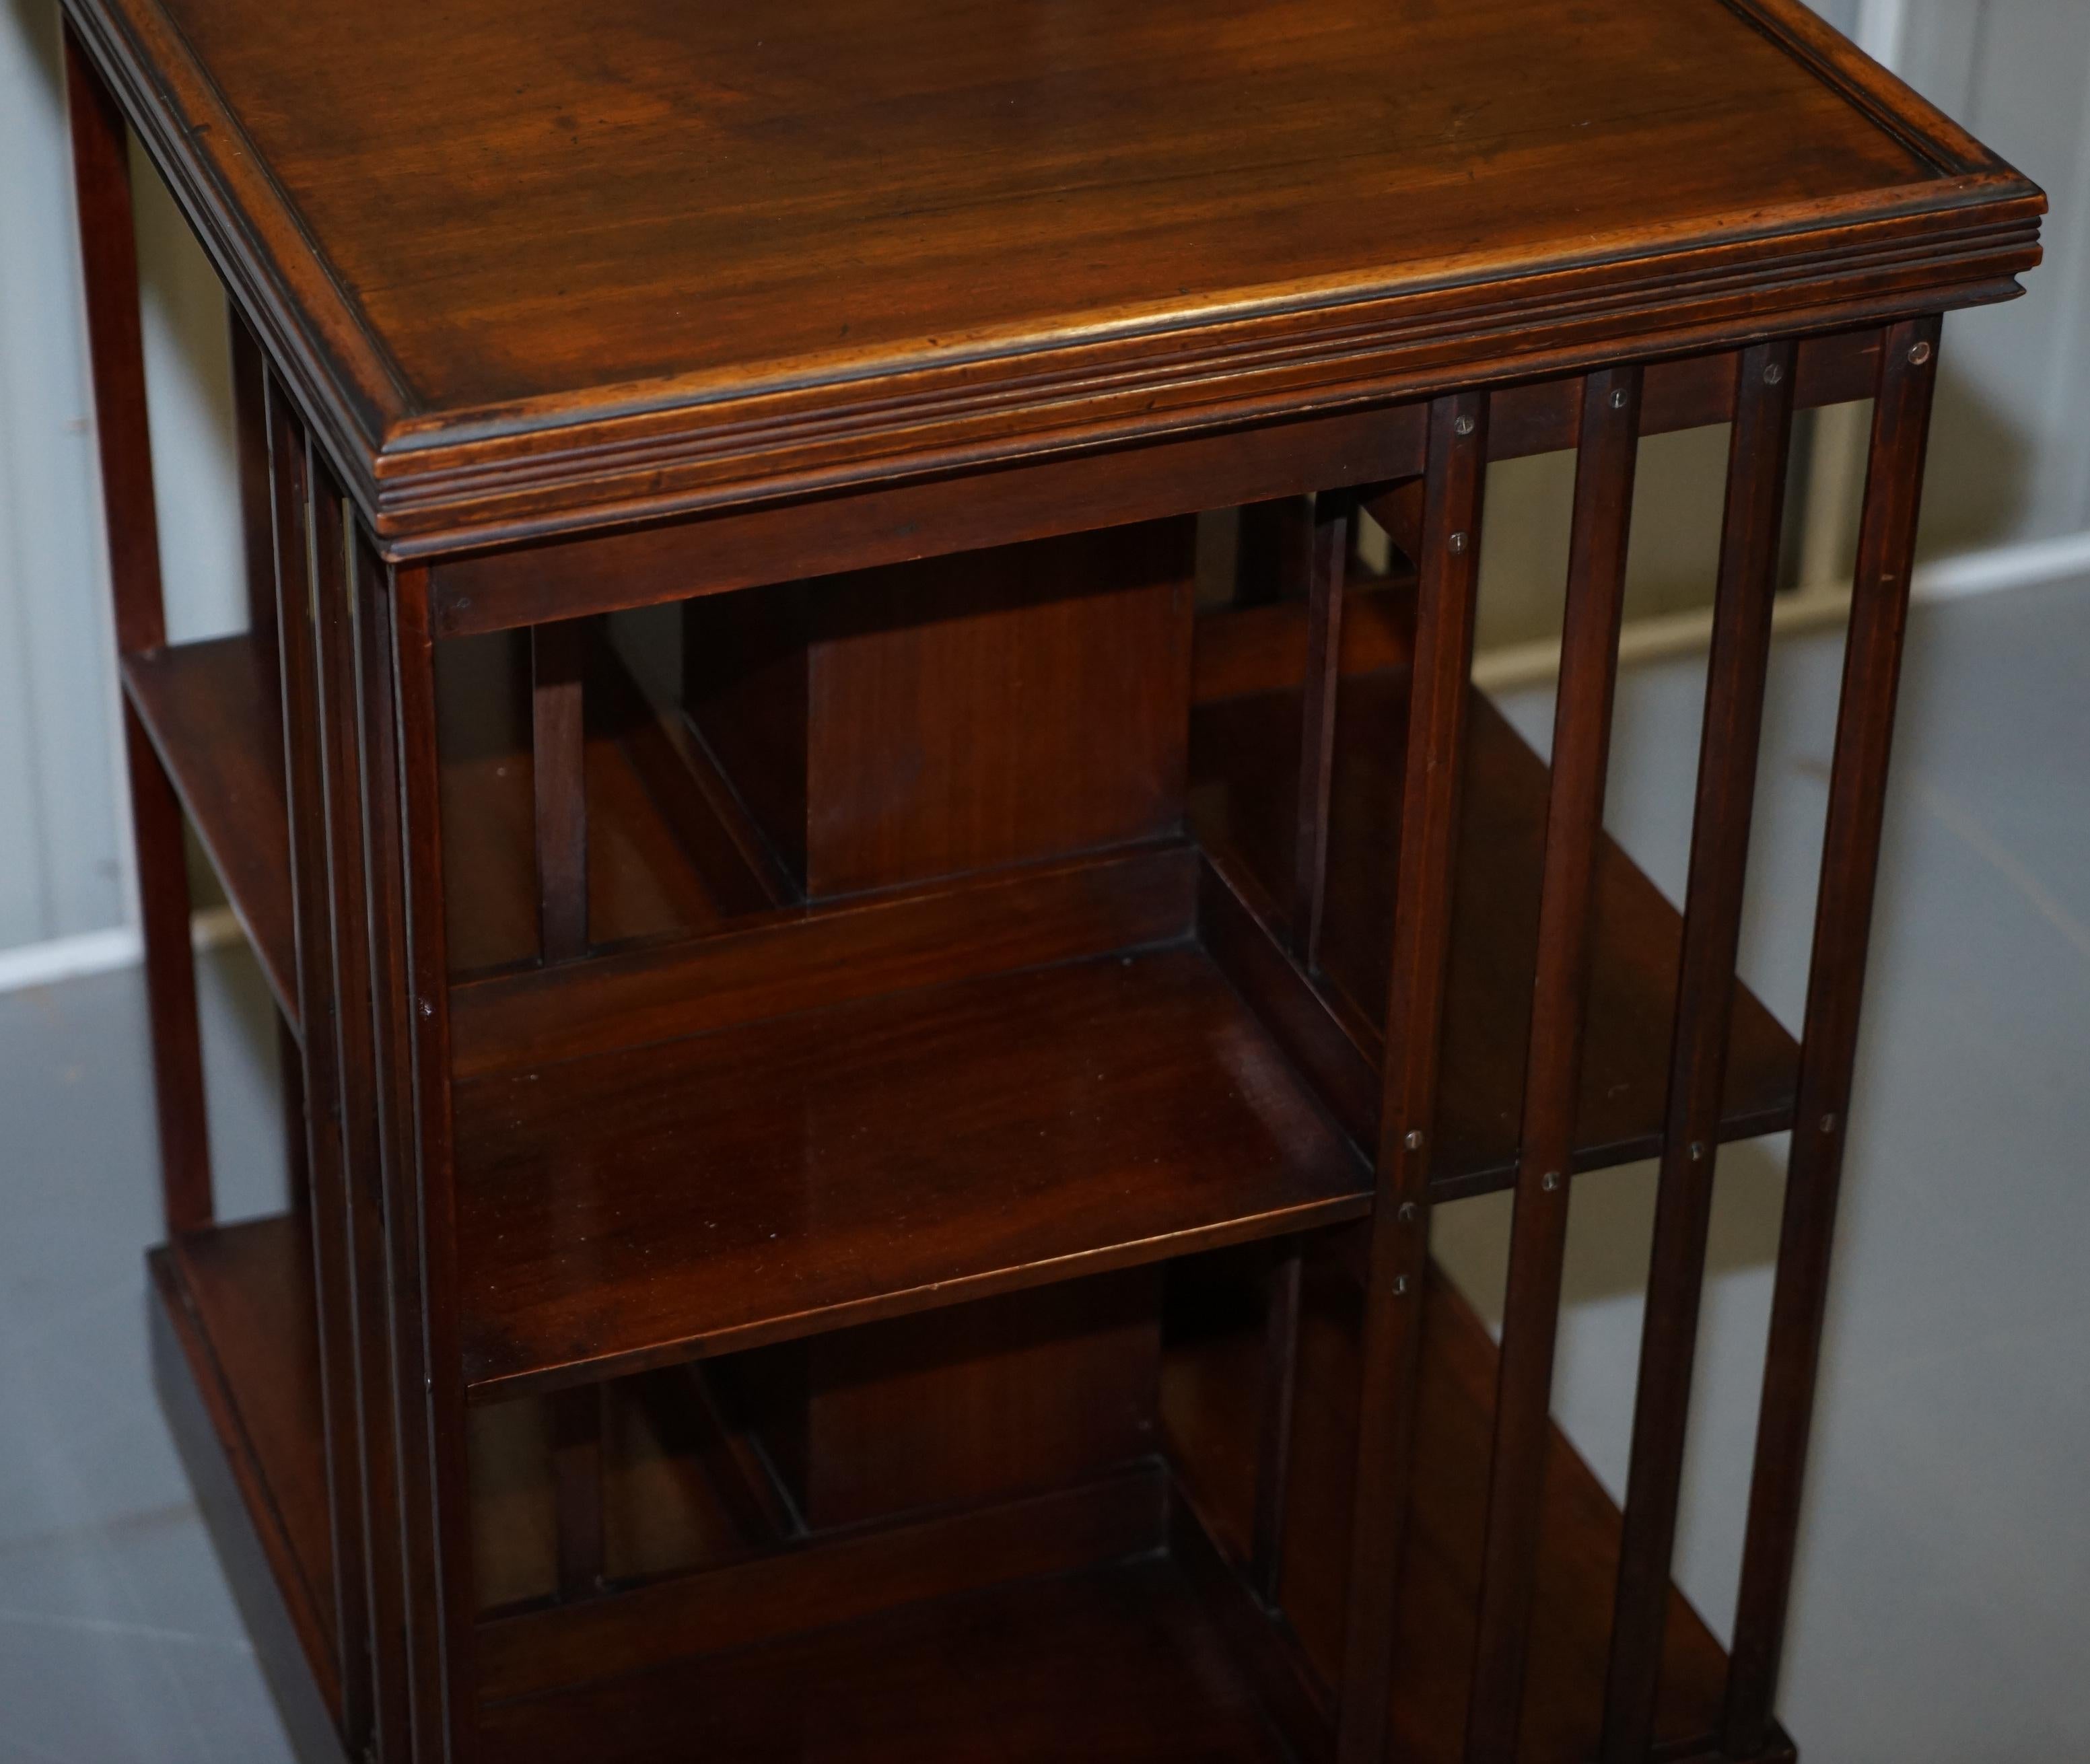 Mahogany Edwardian Revolving Library Bookcase Great Side Table Size on Wheels 1